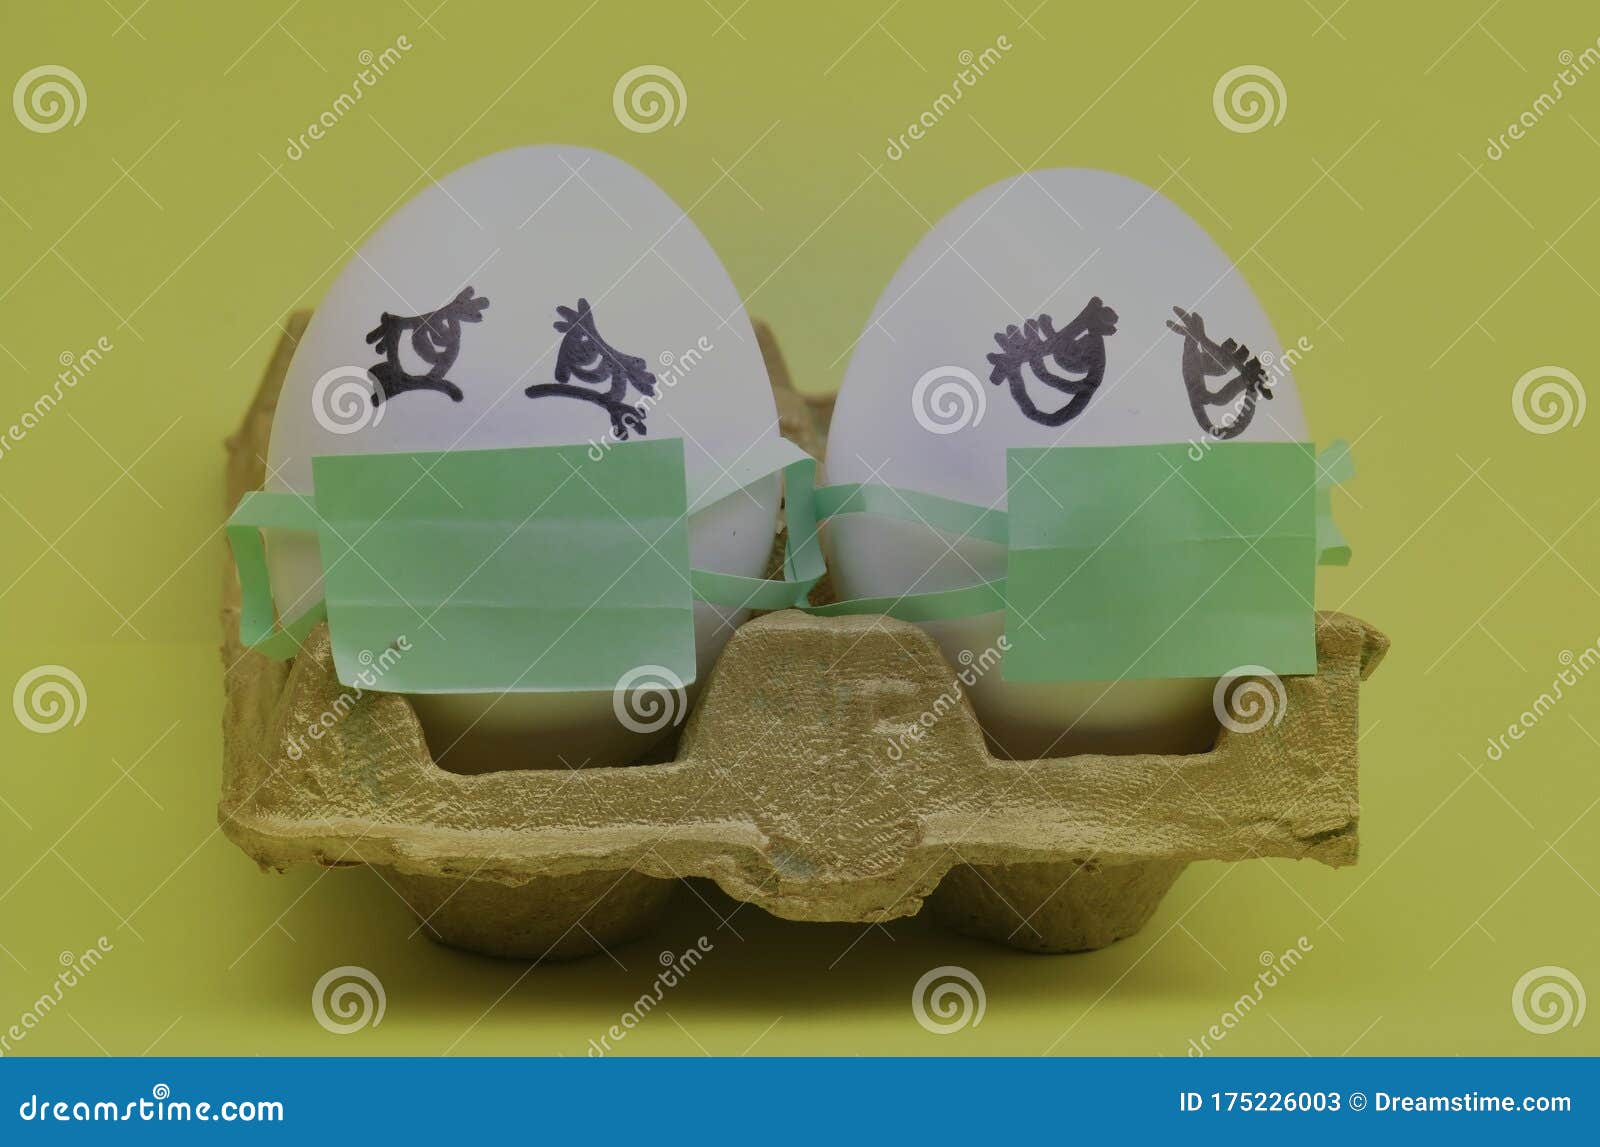 .two white eggs with green masks for fear of contagion of the coronavirus